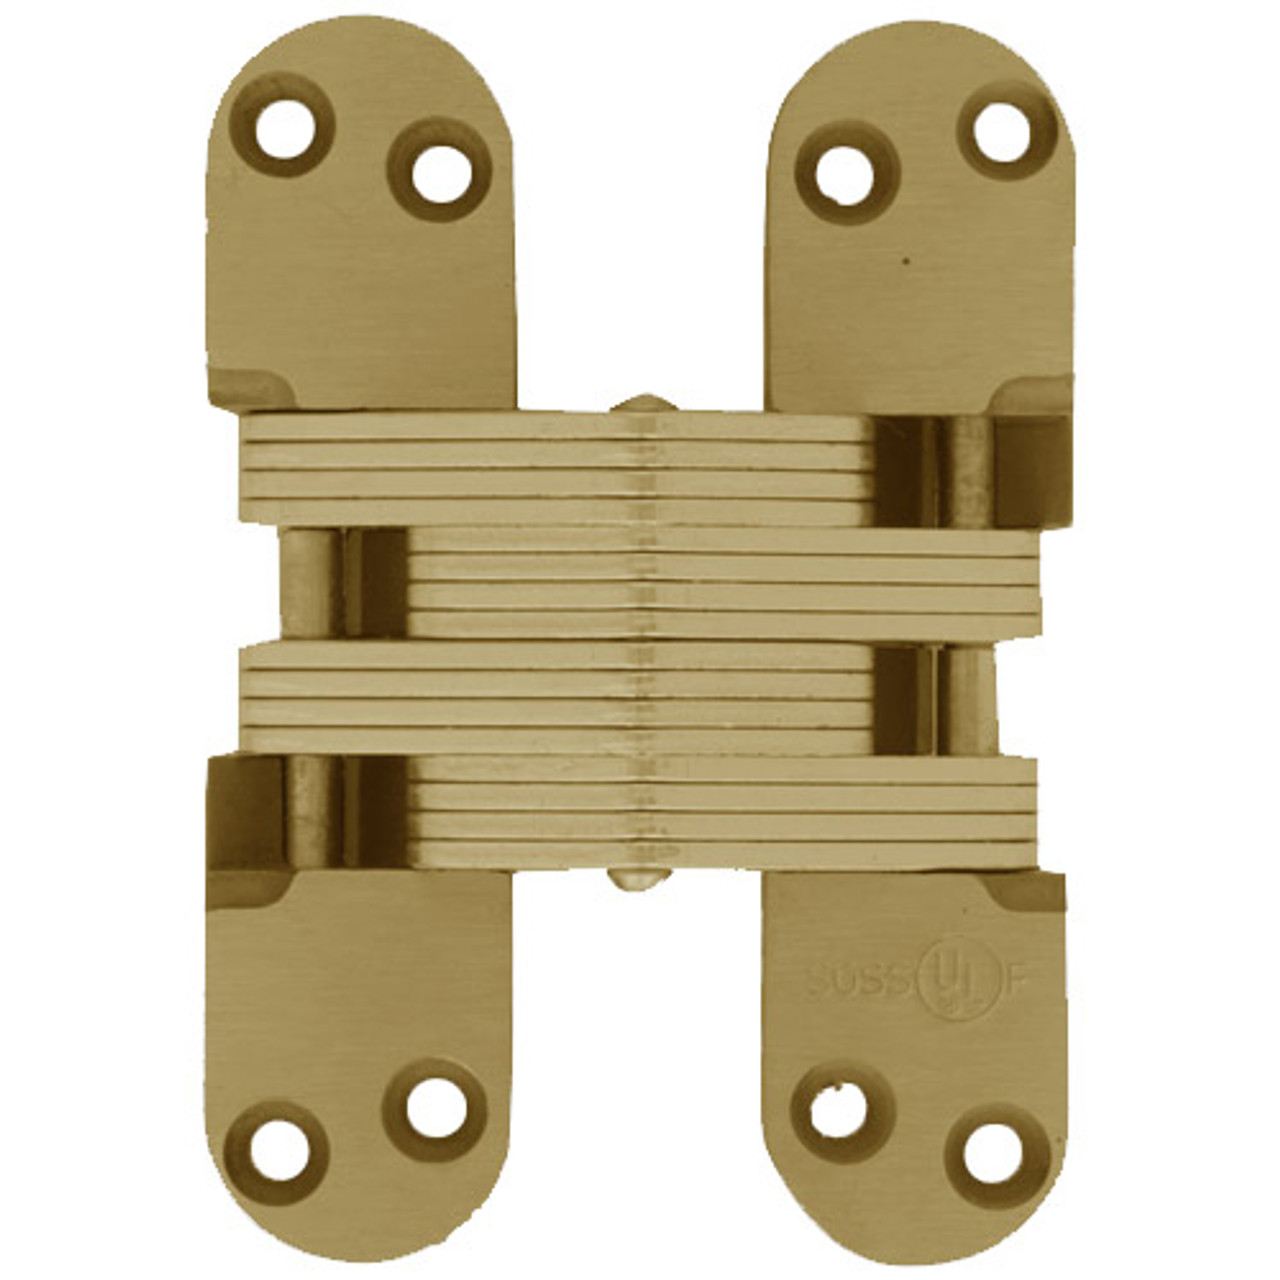 220AS-US4 Soss Invisible Hinge in Satin Brass Finish